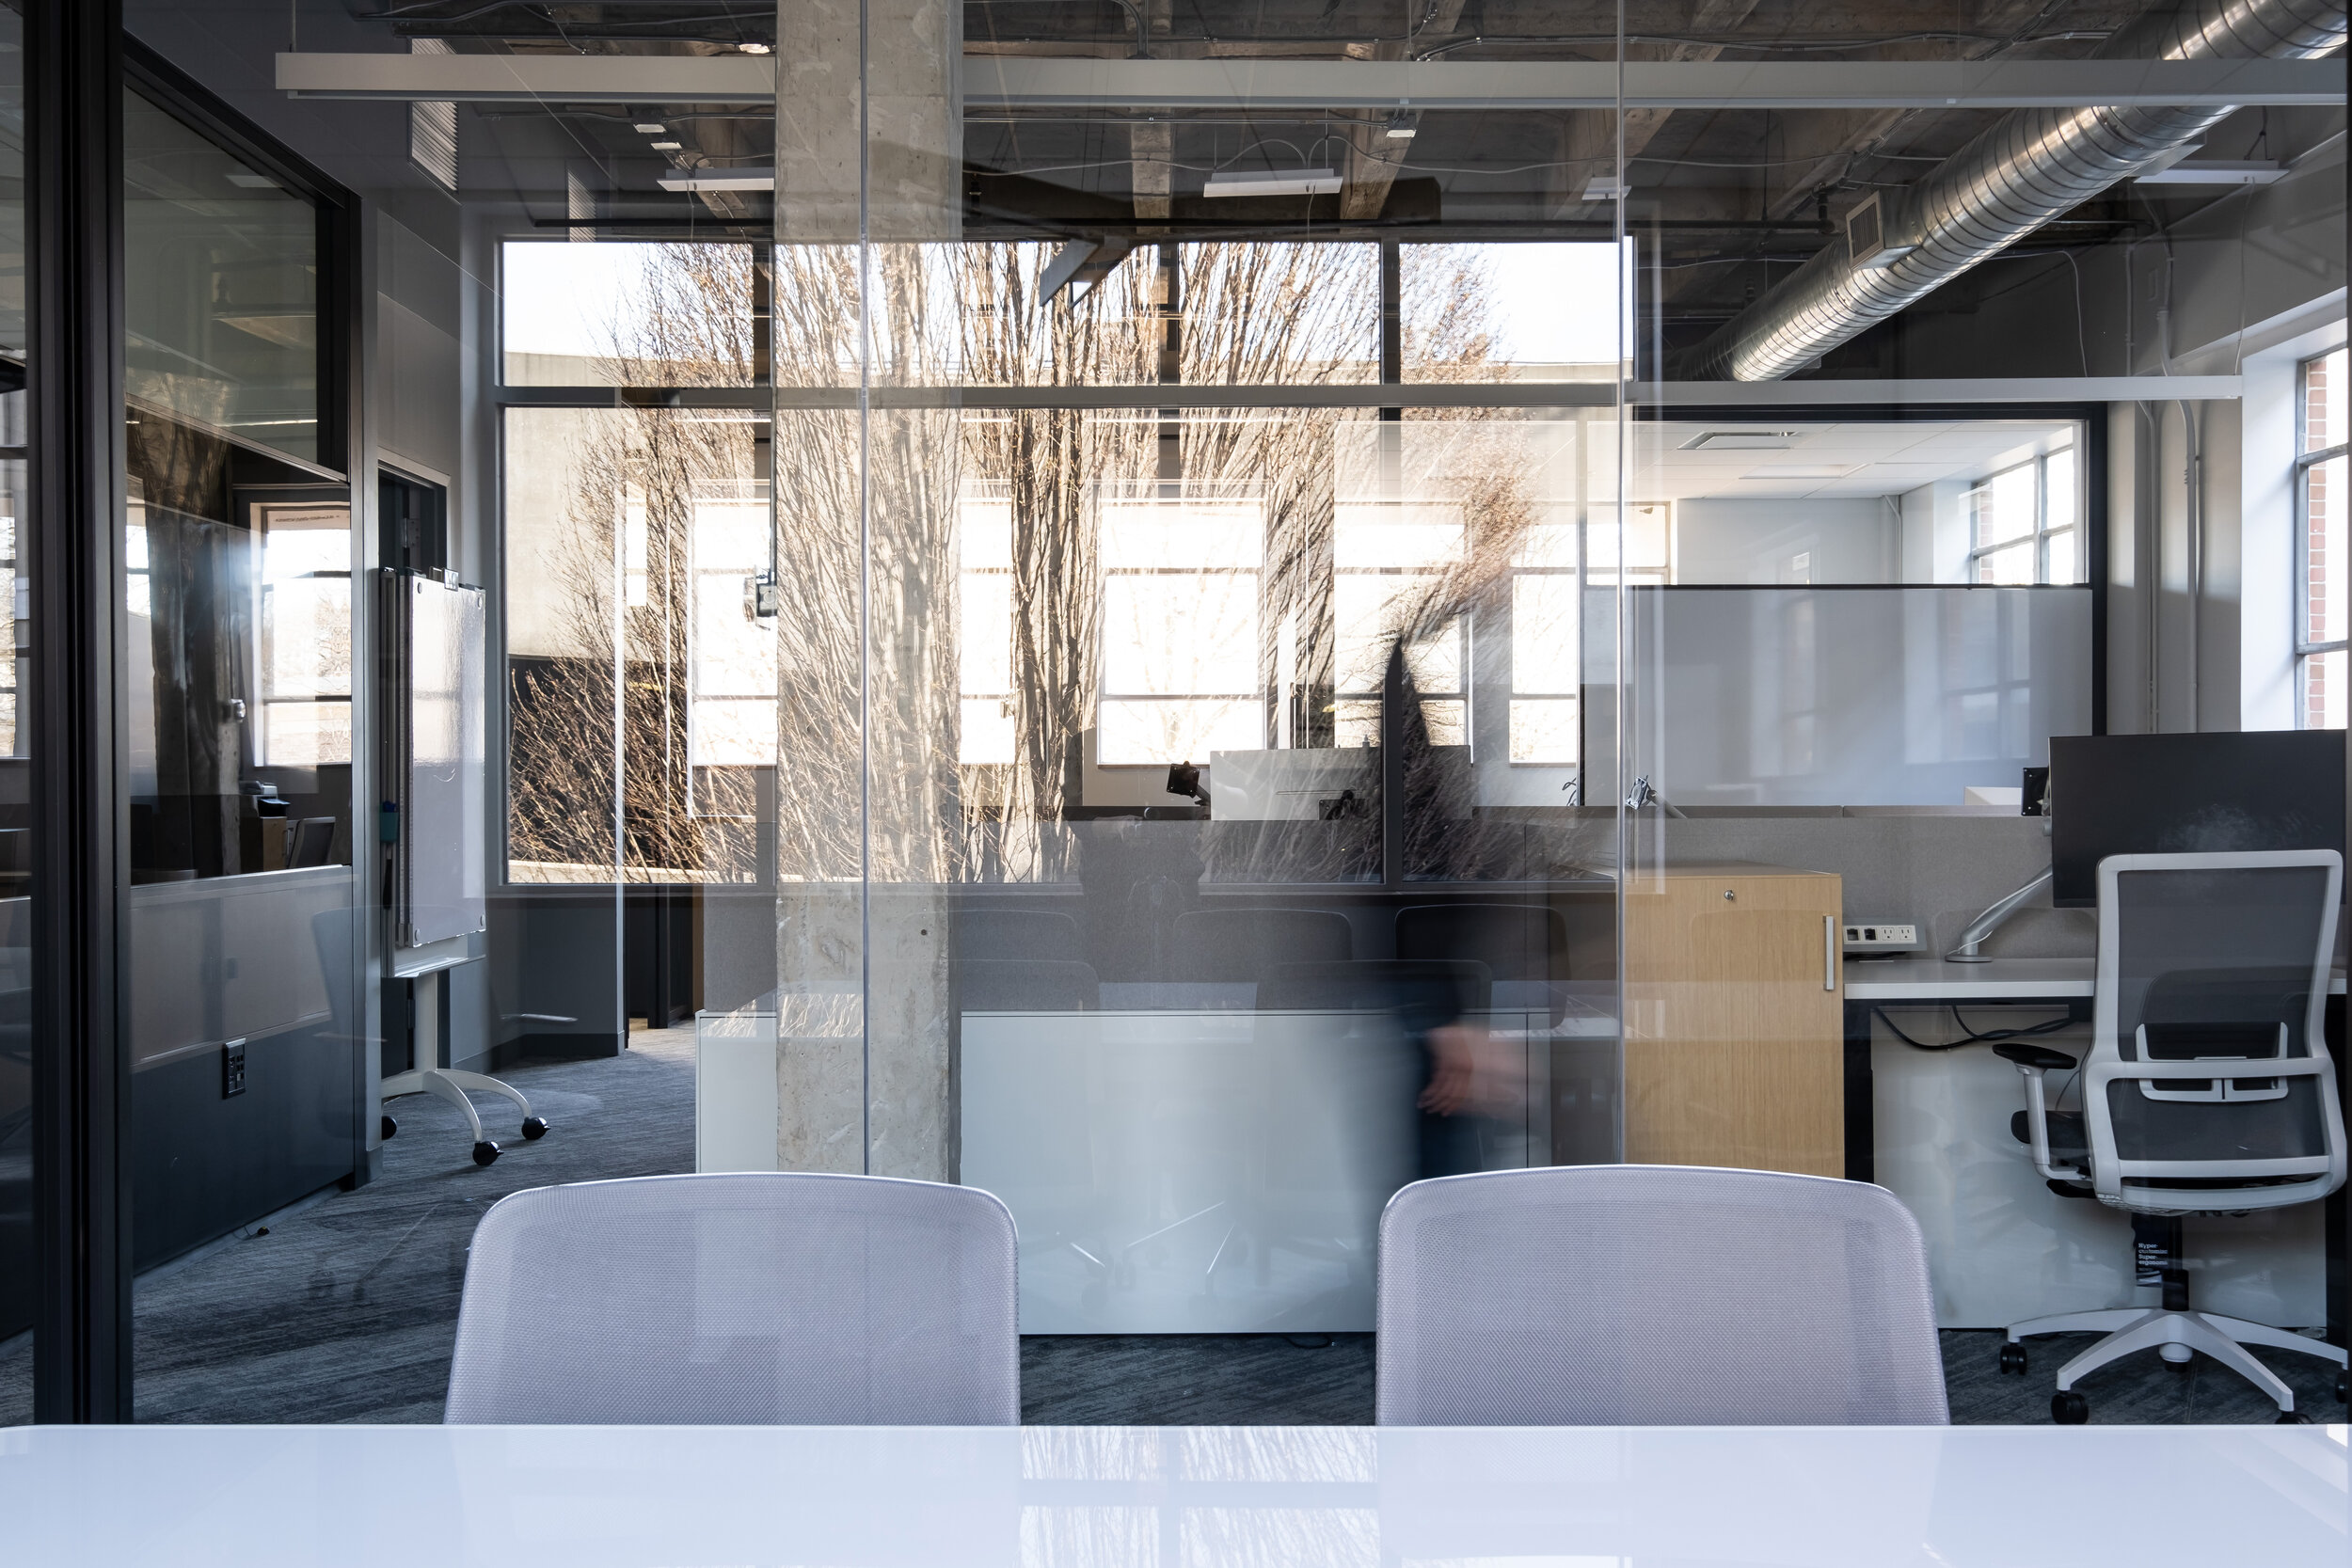  Blue Horse Office Space -  Local Architects  